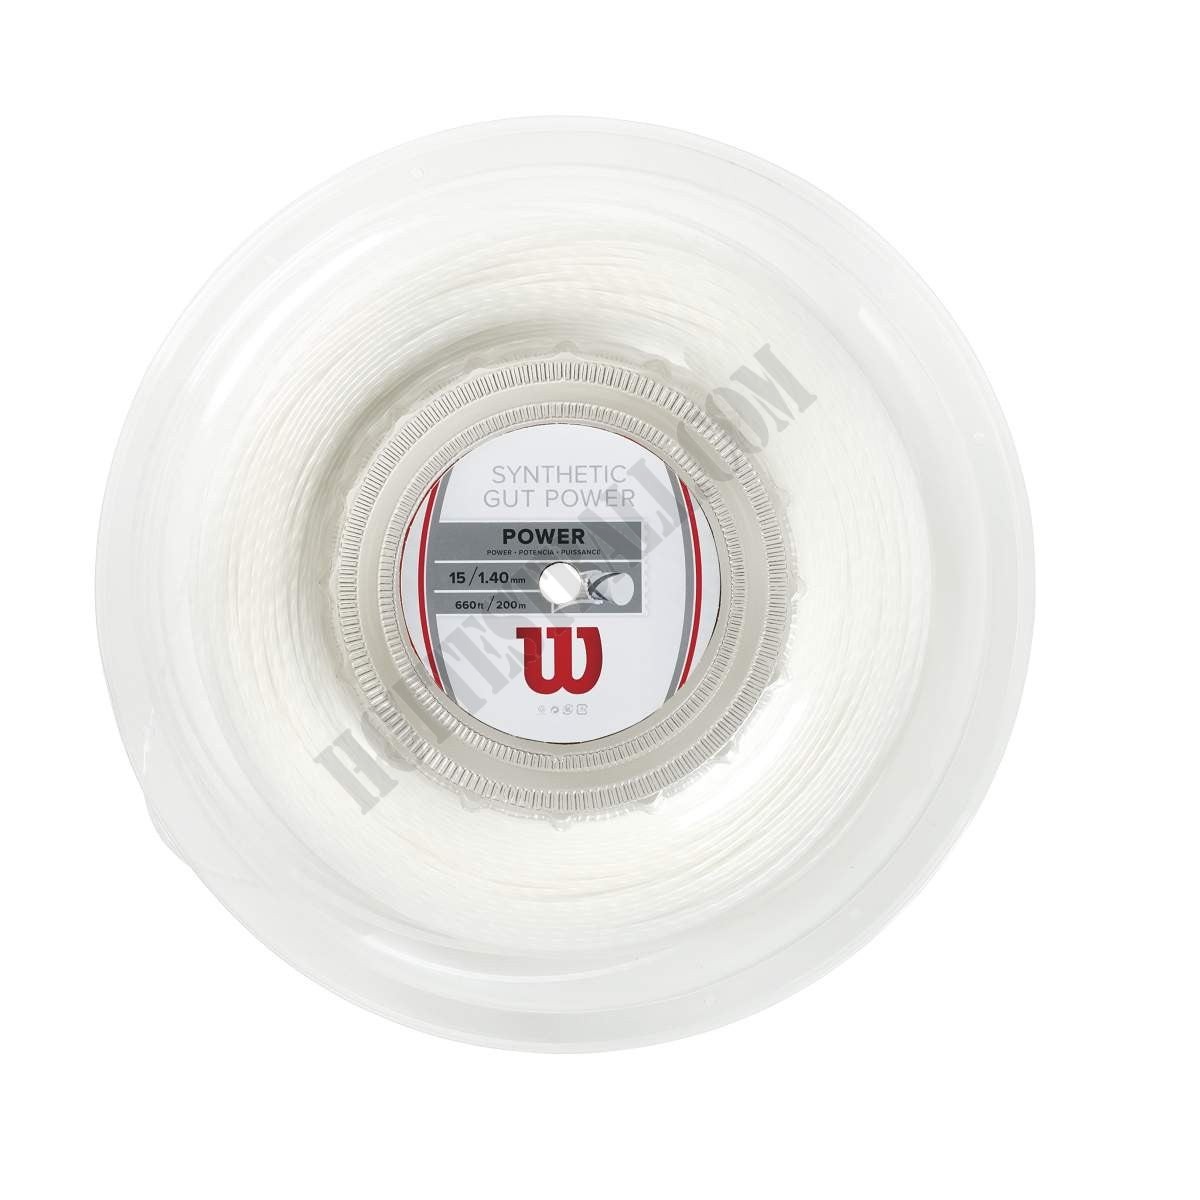 Synthetic Gut Power Tennis String - Reel - Wilson Discount Store - -0